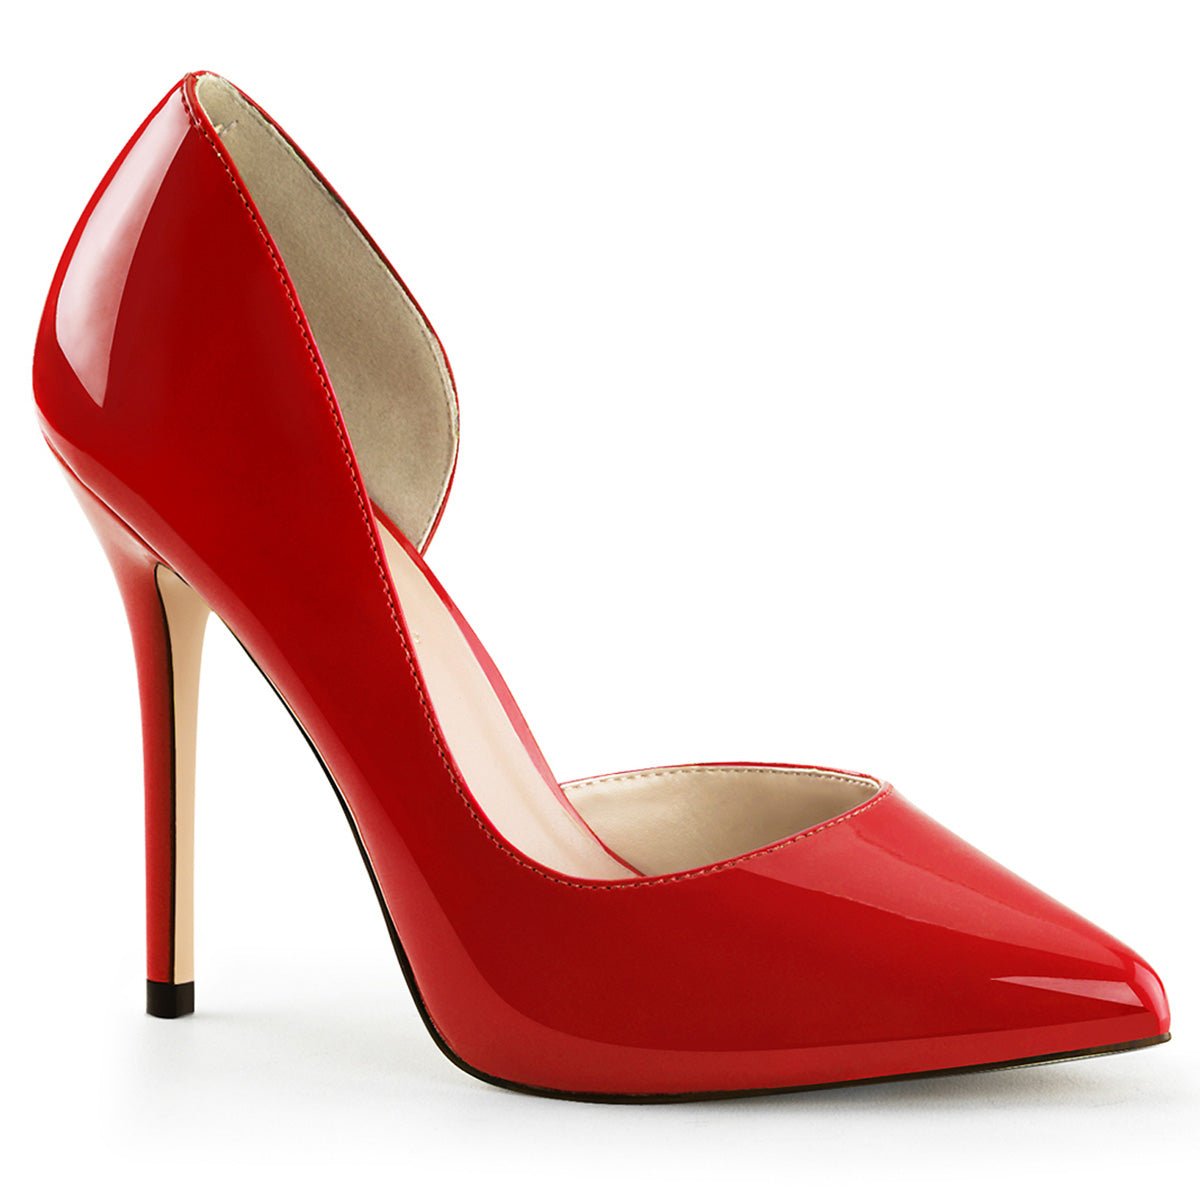 Pleaser Amuse 22 Red - Model Express VancouverShoes